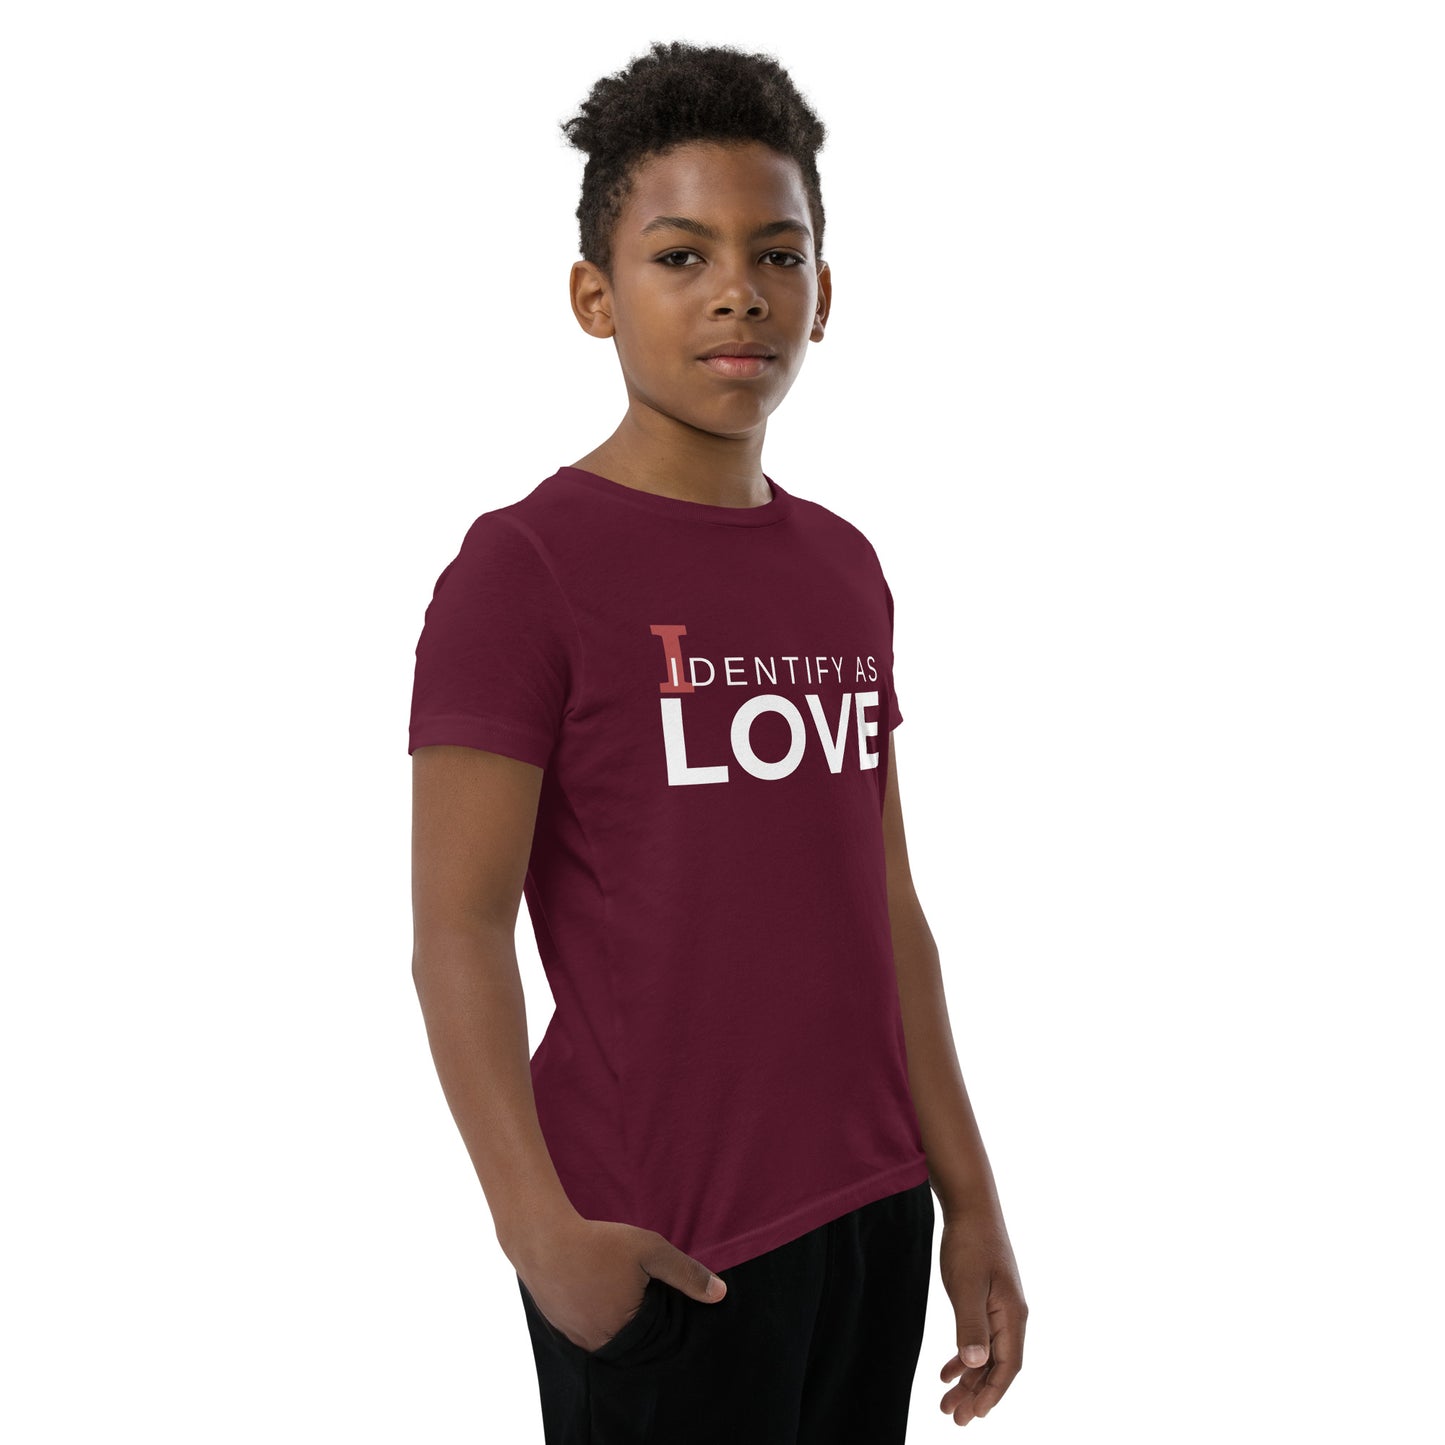 Identify As Love Youth Short Sleeve T-Shirt